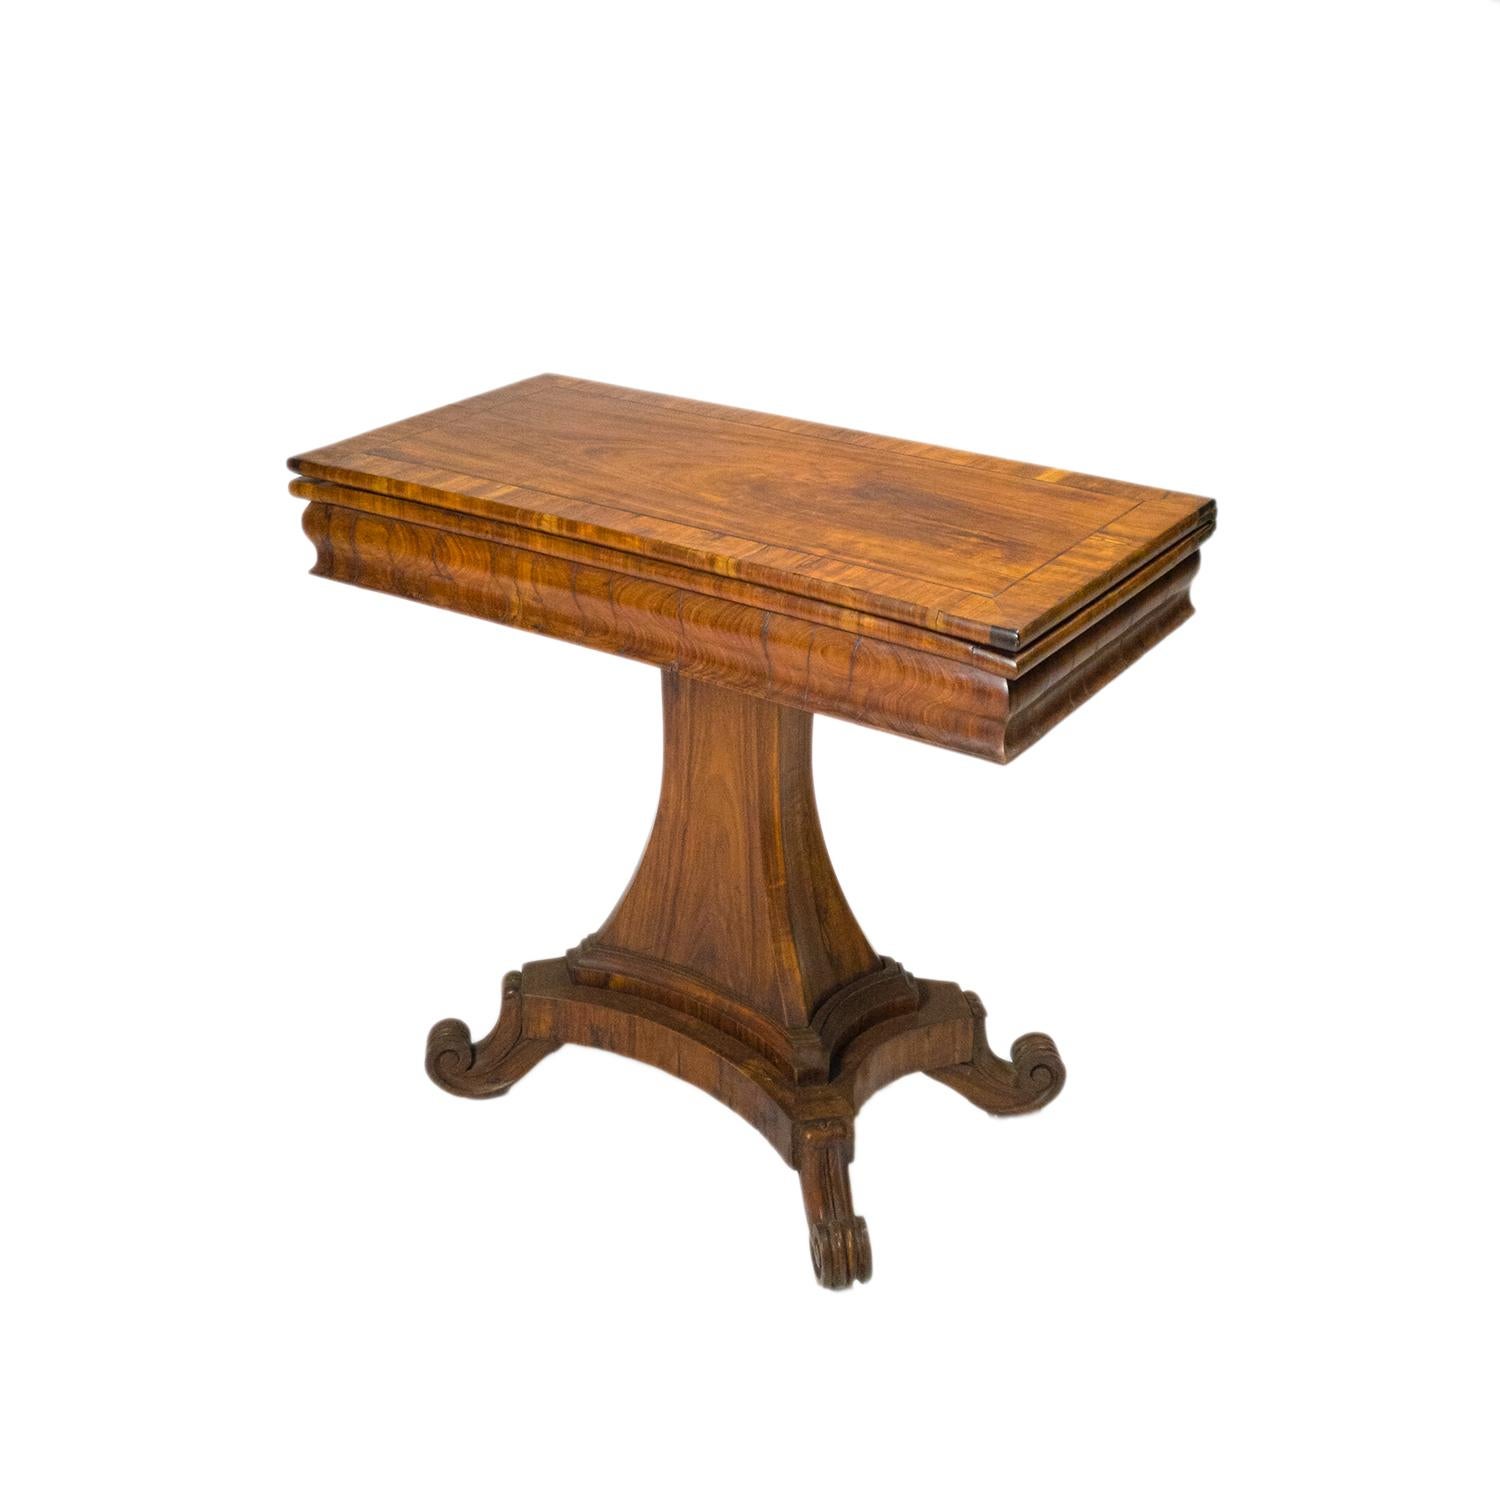 A superb walnut turn over leaf card table with a hinged and molded top of rectangular form folding over to reveal fitted wooden playing surface, finely hand carved.